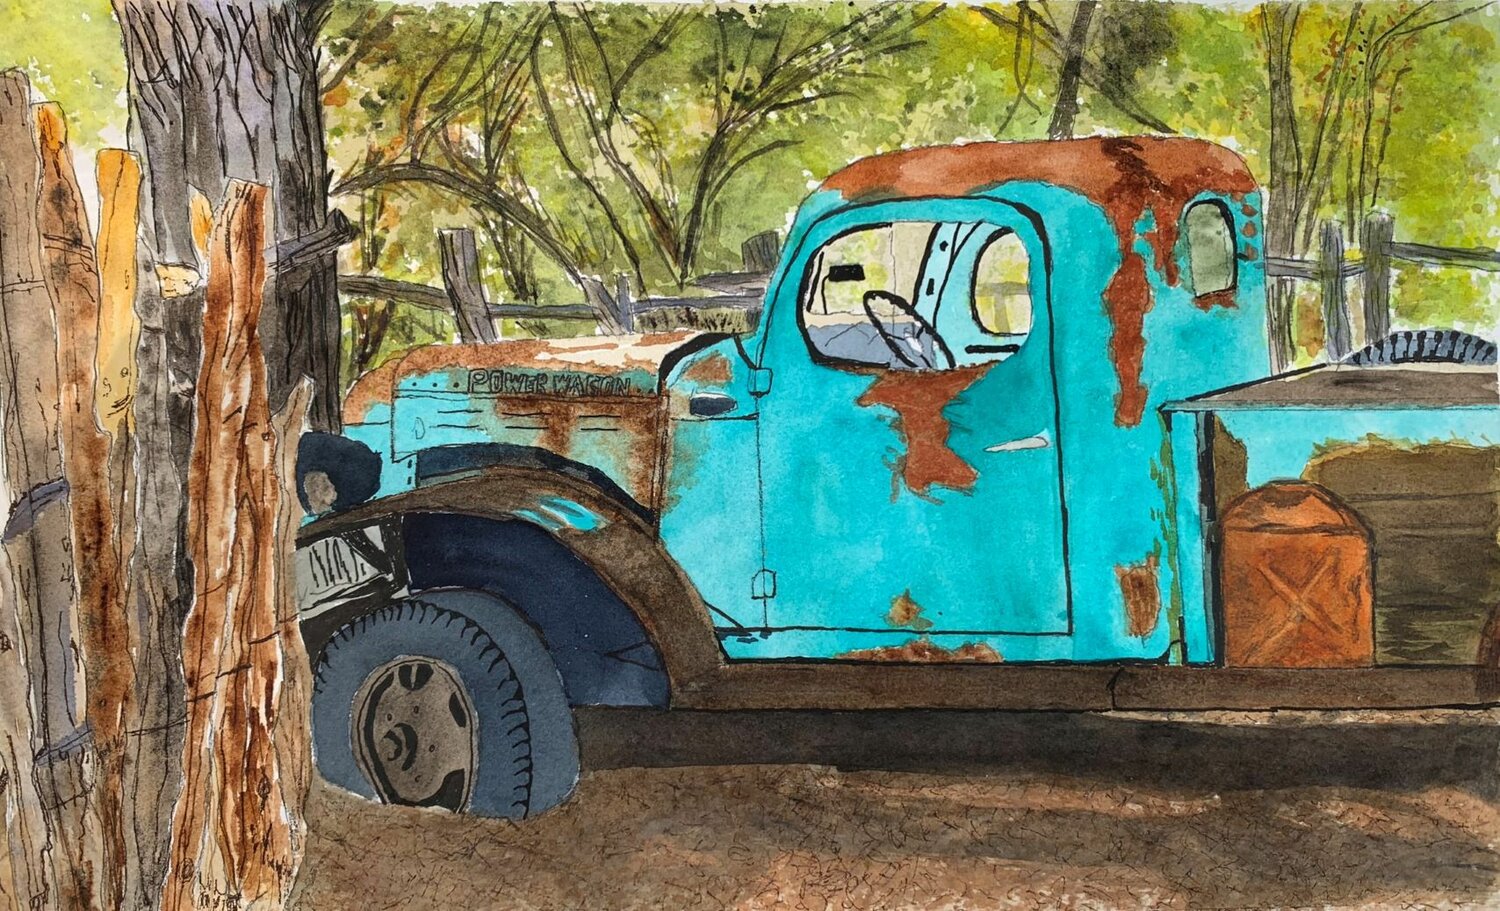 “Power Wagon” by Janes Hayes.